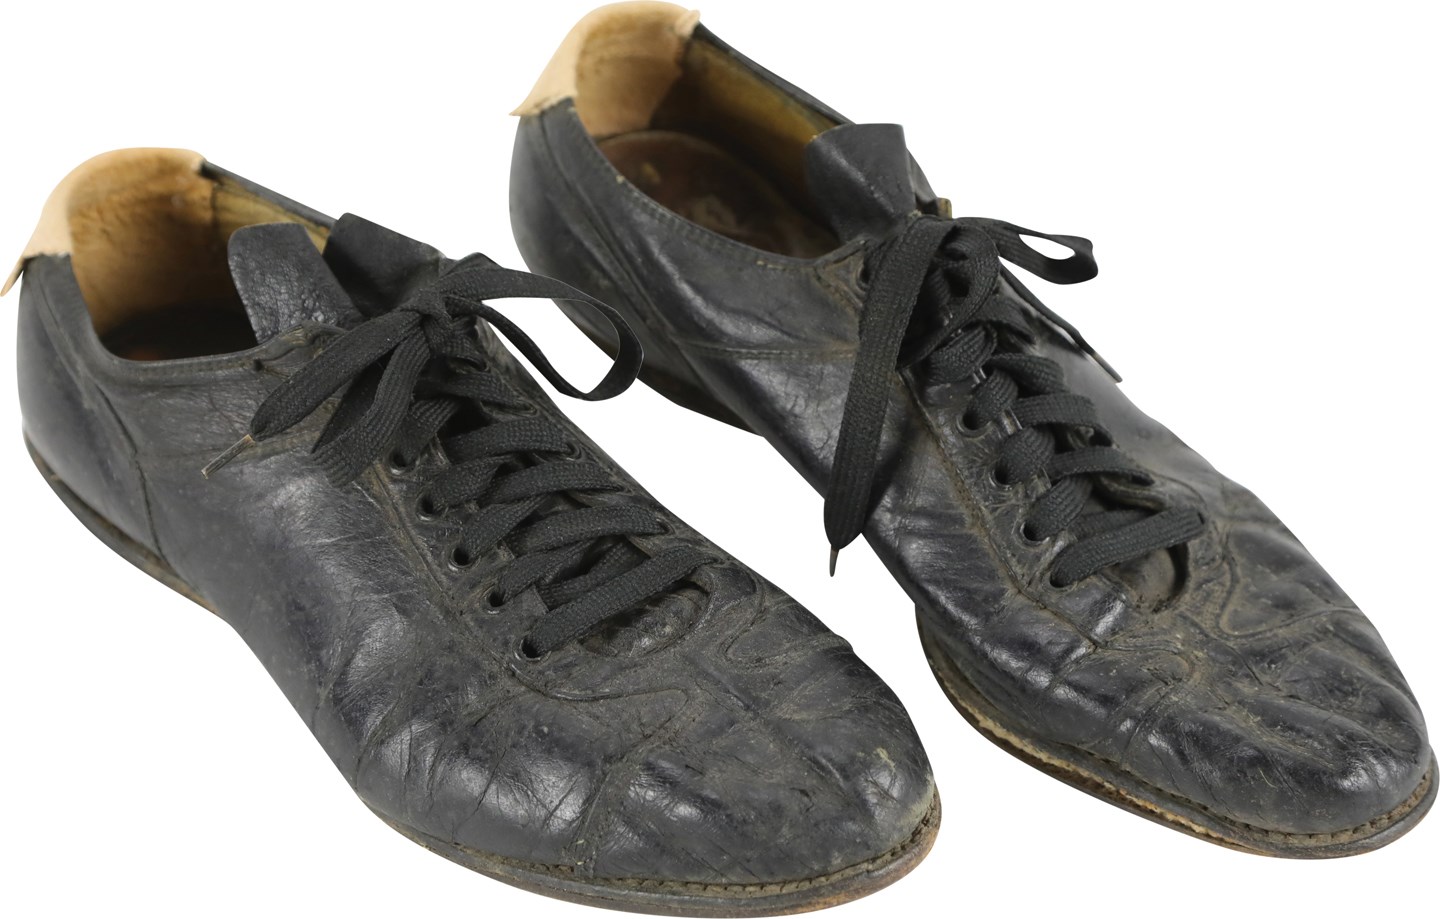 - Circa 1960s Frank Thomas Signed & Game Used Cleats